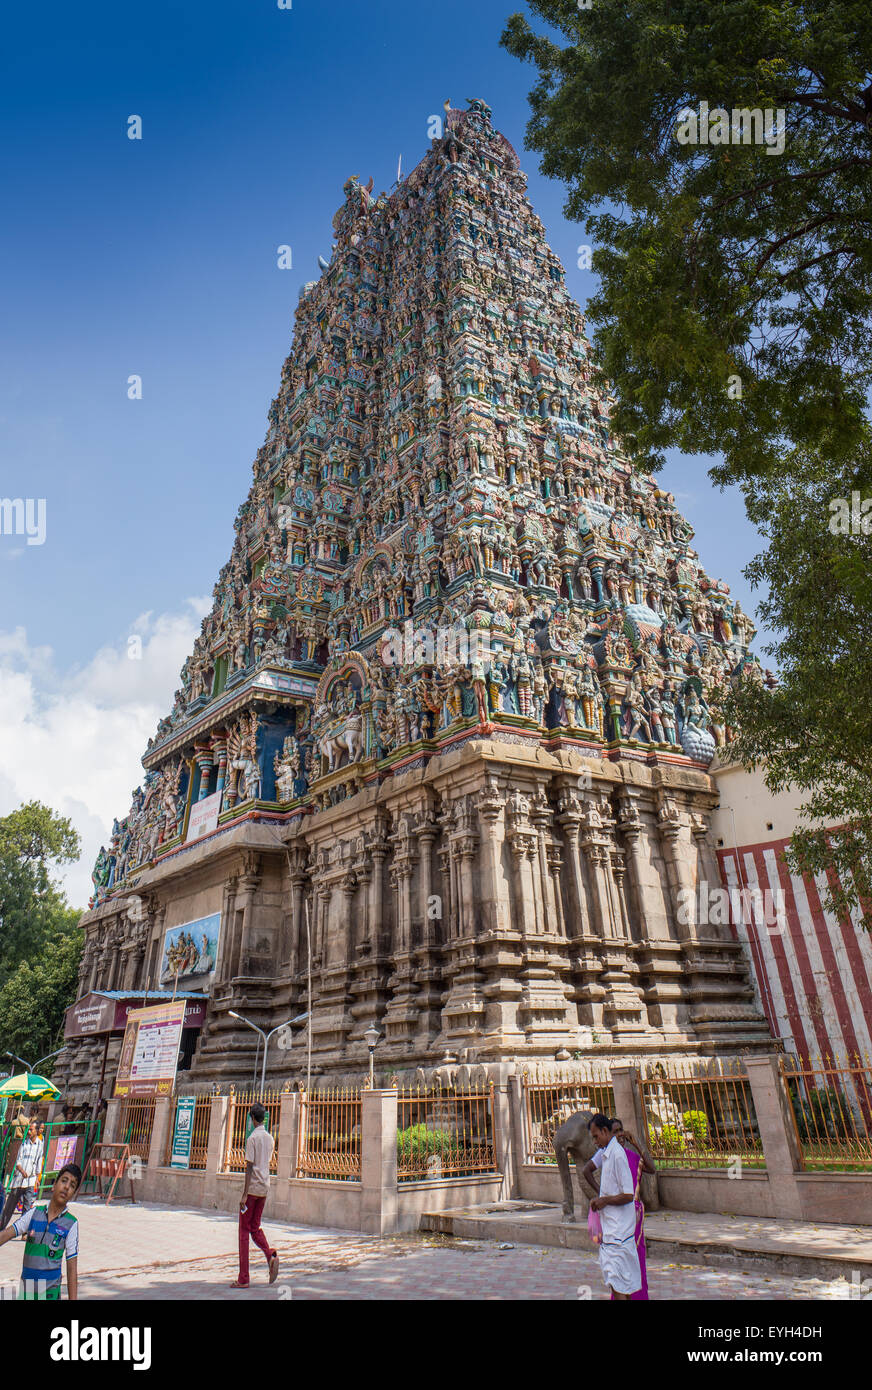 Colorful tower of Meenakshi Amman Temple Stock Photo